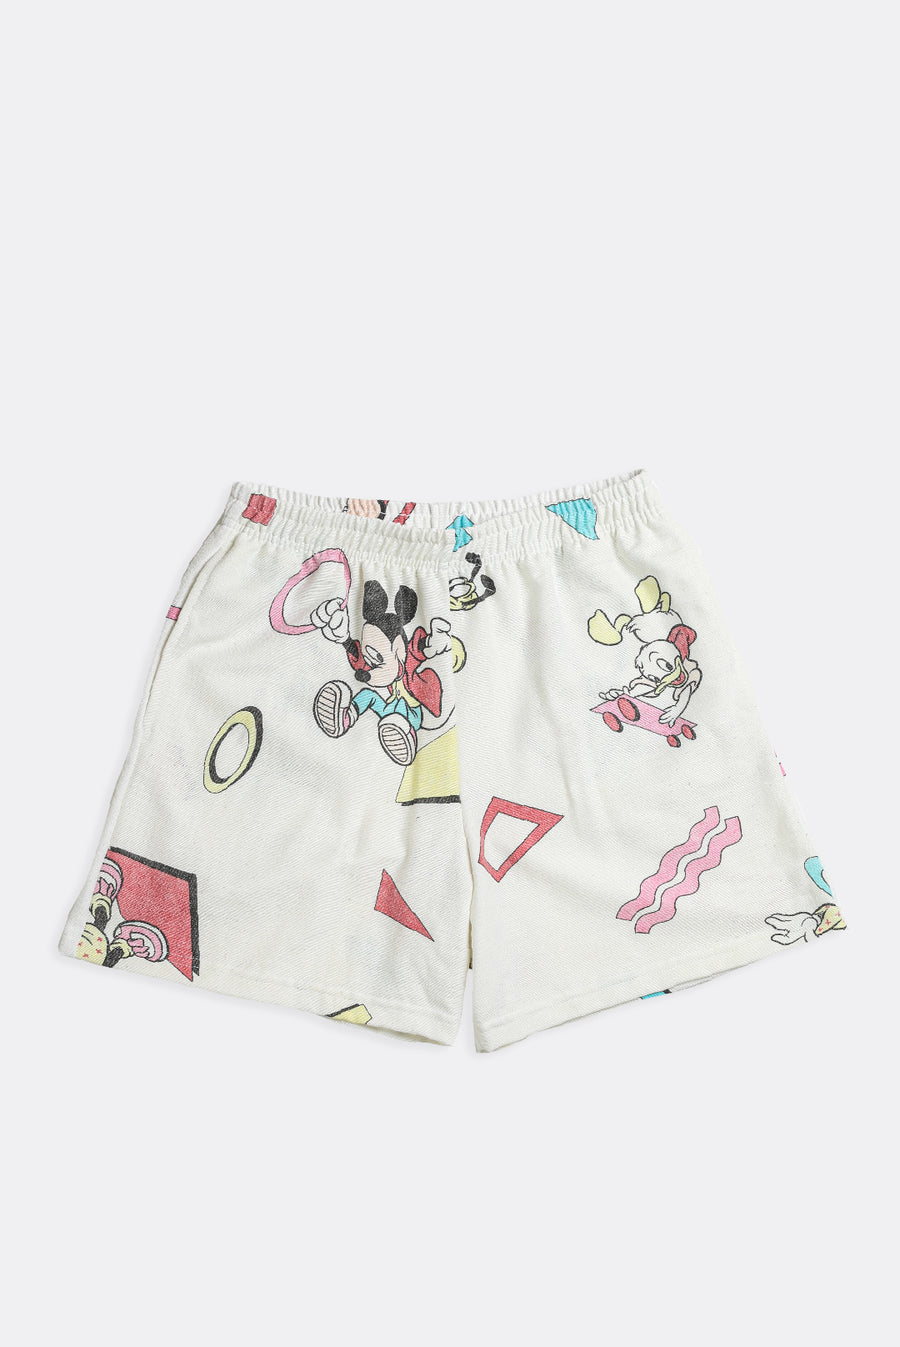 Unisex Rework Mickey Mouse and Friends Boxer Shorts - S, M